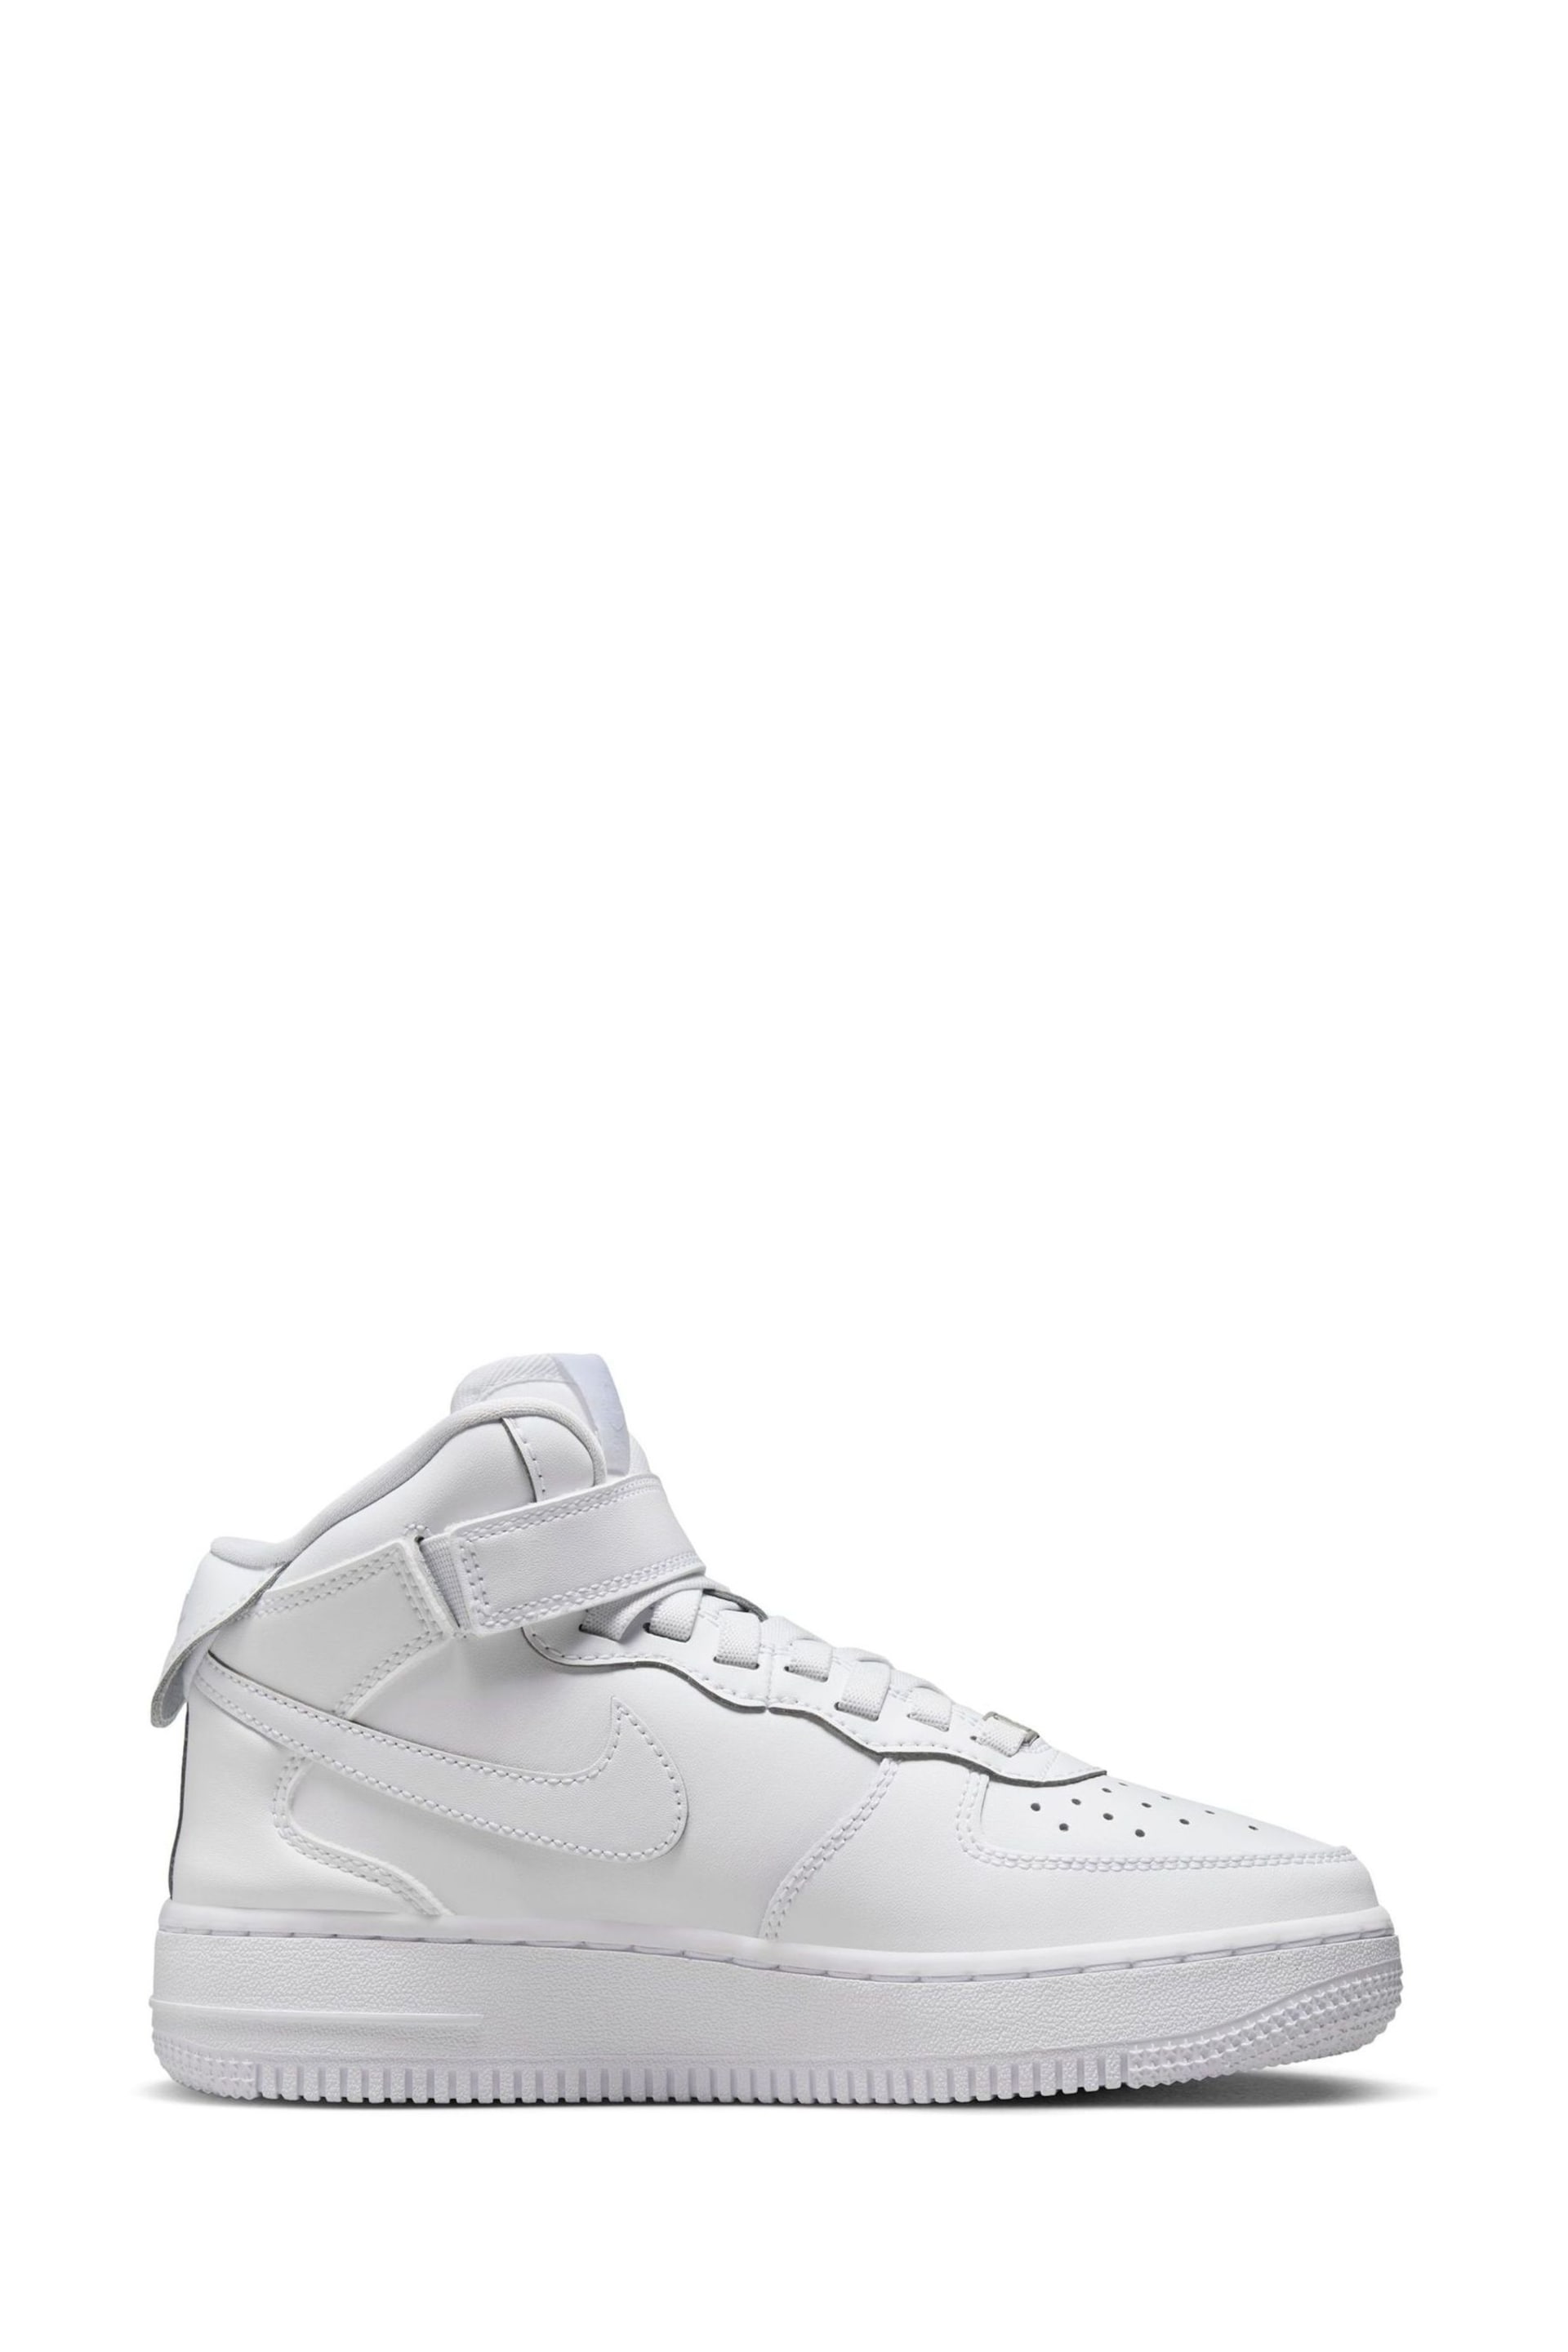 Nike White Youth Air Force 1 Mid EasyOn Trainers - Image 4 of 13